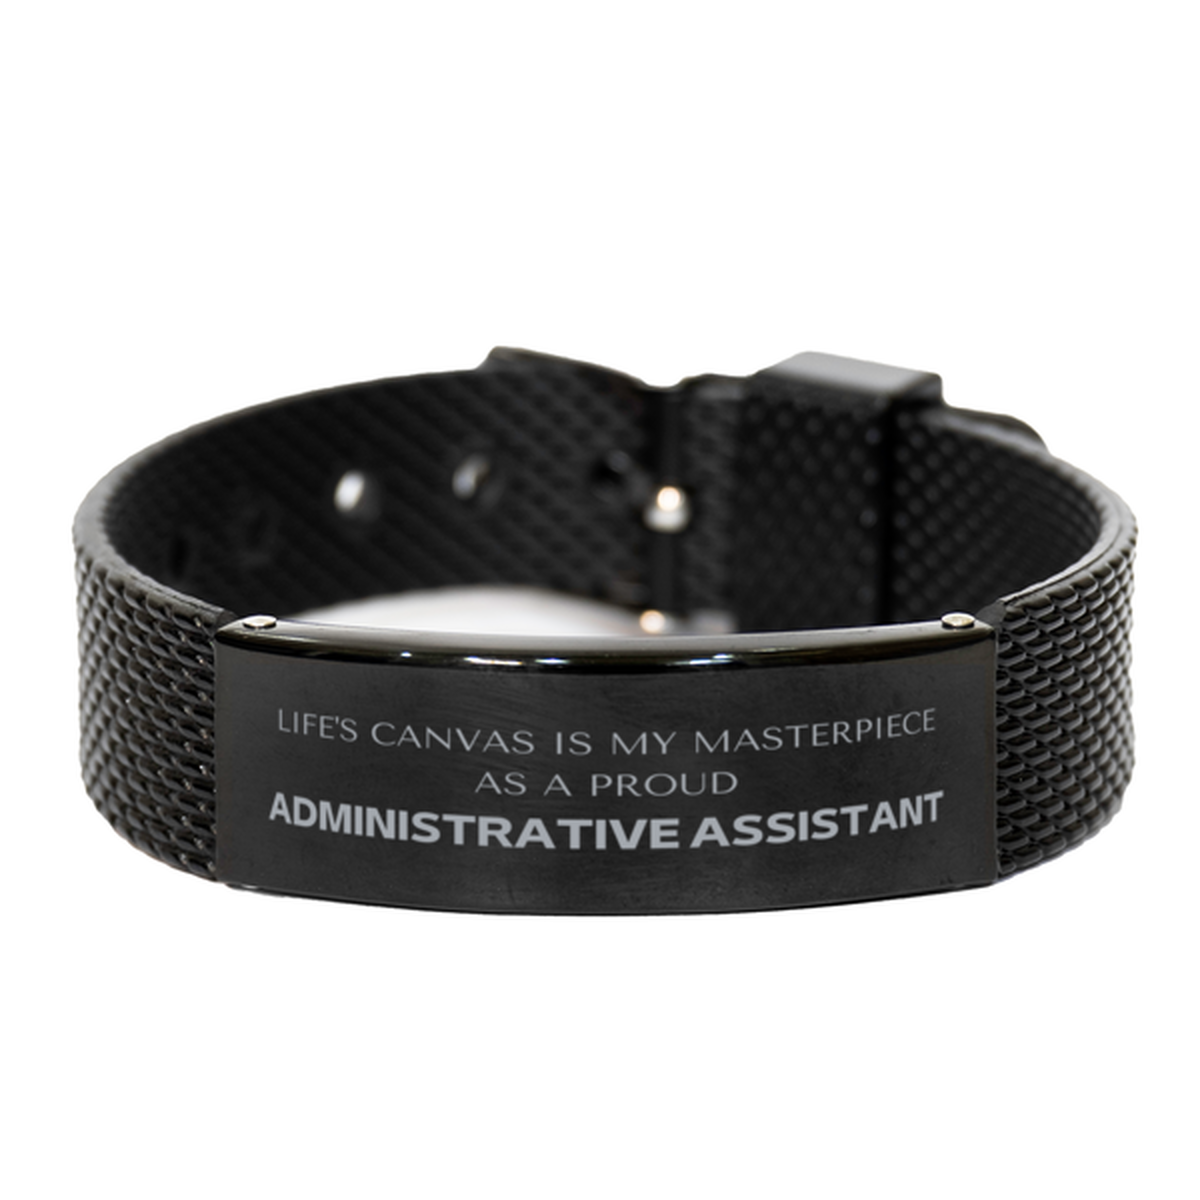 Proud Administrative Assistant Gifts, Life's canvas is my masterpiece, Epic Birthday Christmas Unique Black Shark Mesh Bracelet For Administrative Assistant, Coworkers, Men, Women, Friends